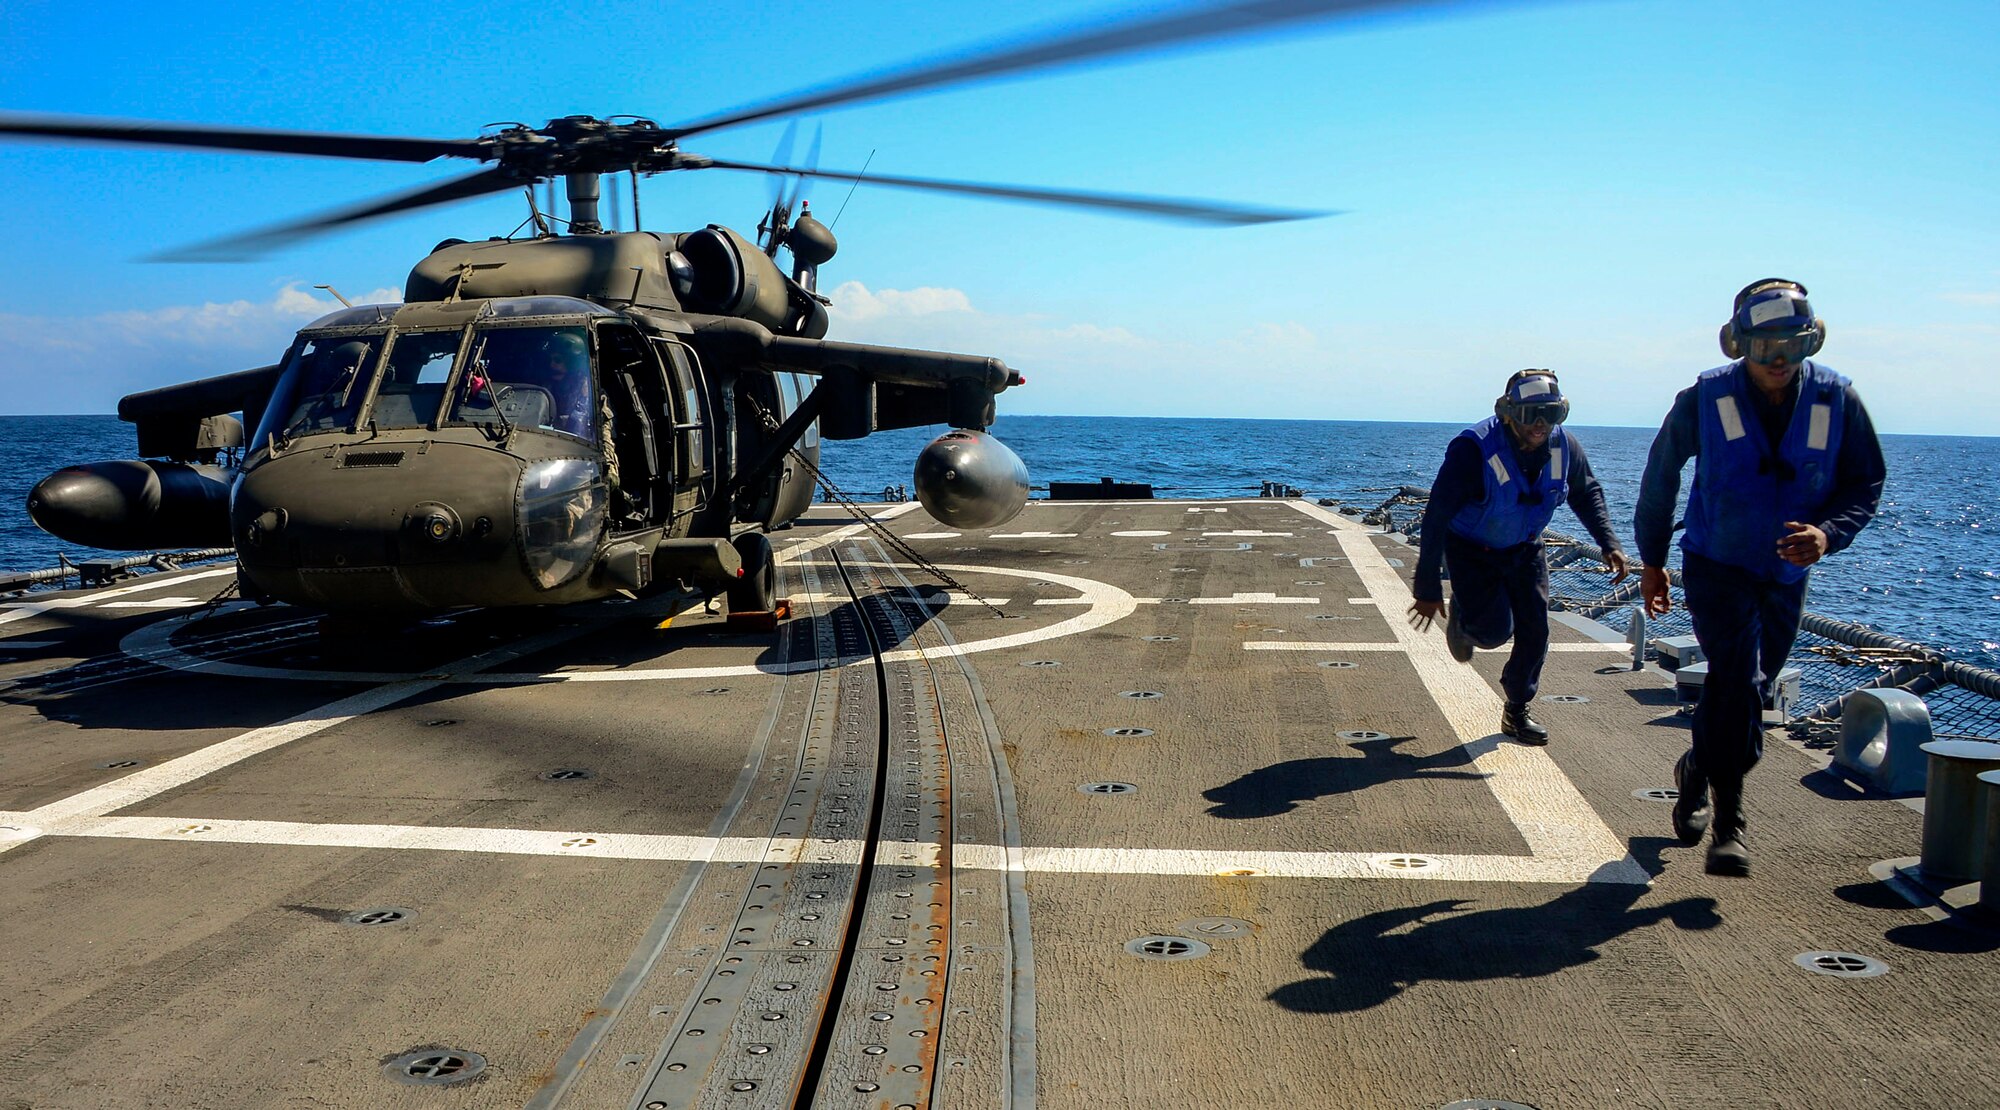 U.S. Navy plane handlers leave the rotor area after tying down a UH-60 Blackhawk helicopter assigned to the 1st Battalion, 228th Aviation Regiment during deck landing qualifications off the coast of Honduras, Feb. 1, 2015.  The 1-228th Avn. Reg. aircrew participated in deck landing qualifications on board the USS Kauffman to qualify pilots and crew chiefs on shipboard operations.  Kauffman is on its final scheduled deployment to the U.S. Southern Command area of responsibility supporting multinational, counter-narcotics operation known as Operation Martillo. (U.S. Air Force photo/Tech. Sgt. Heather Redman)